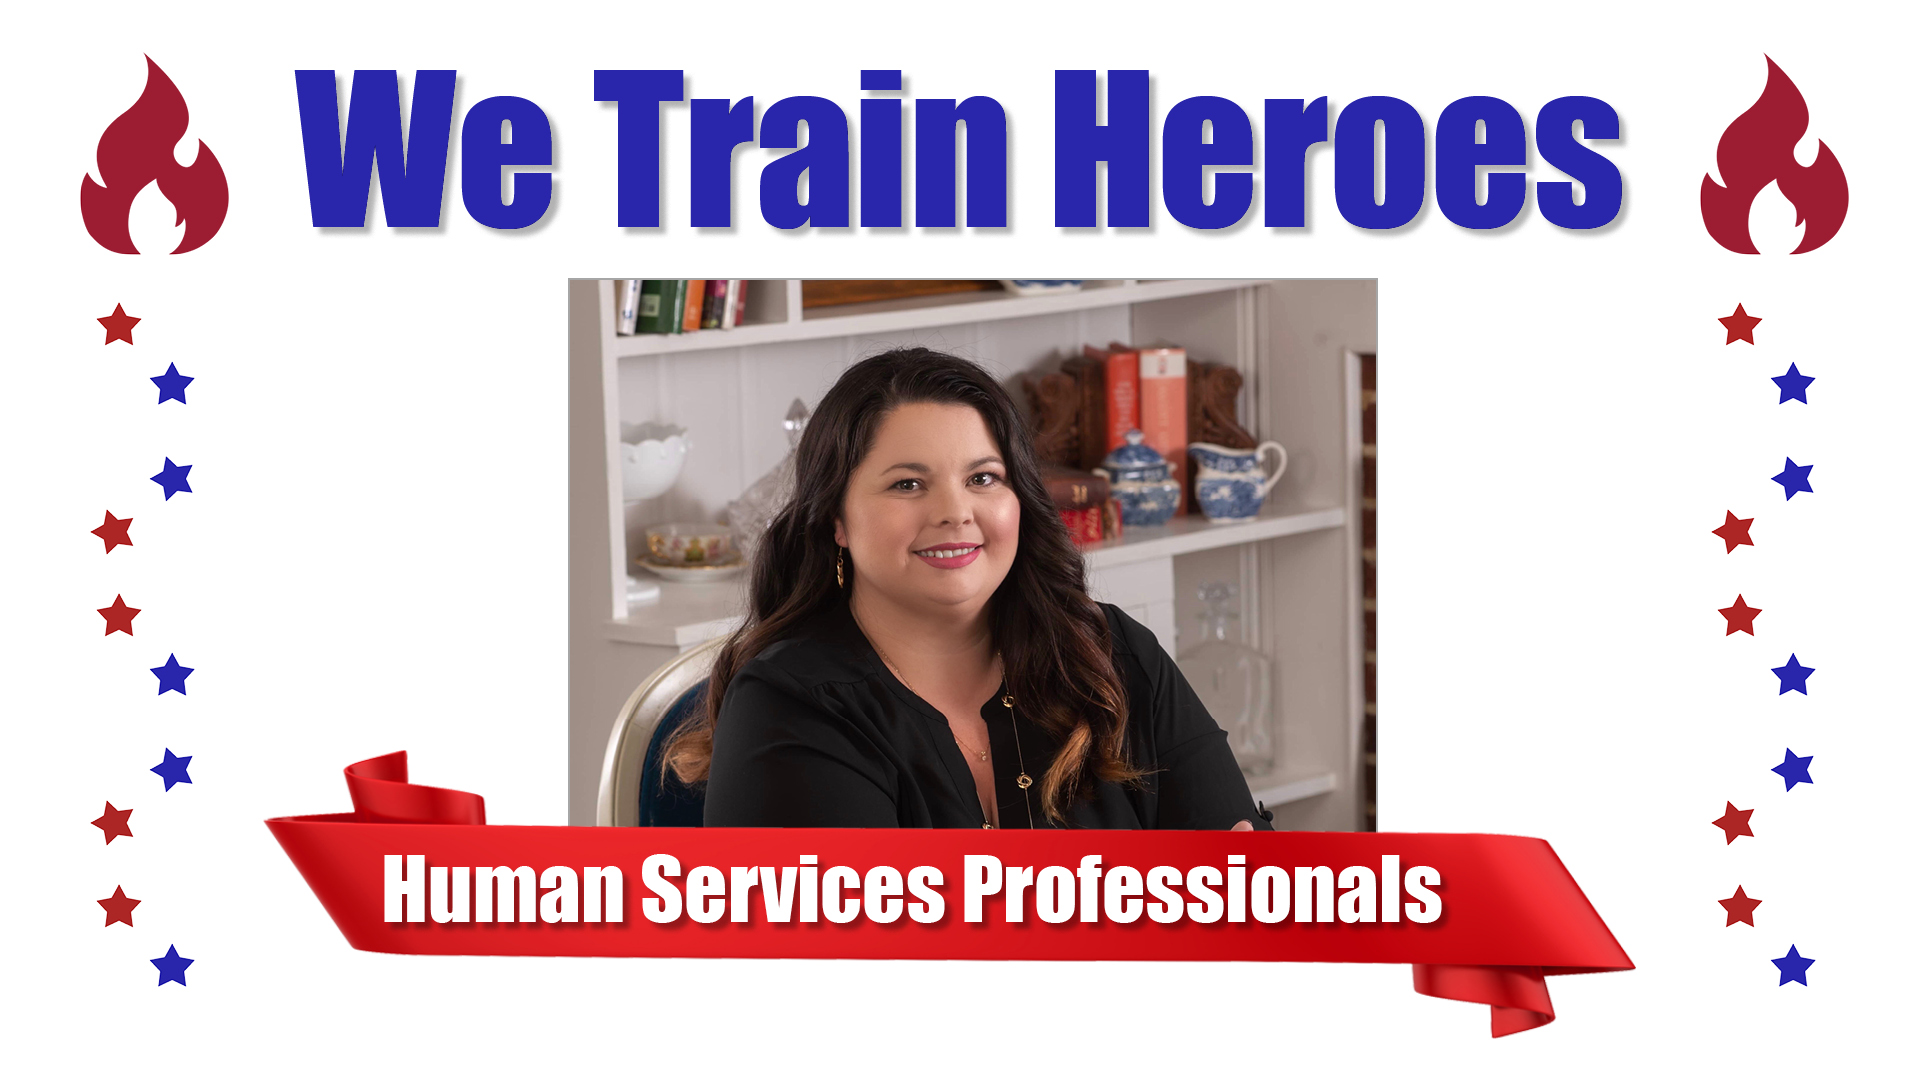 Human Services Professional recognized in a We Train Heroes graphic